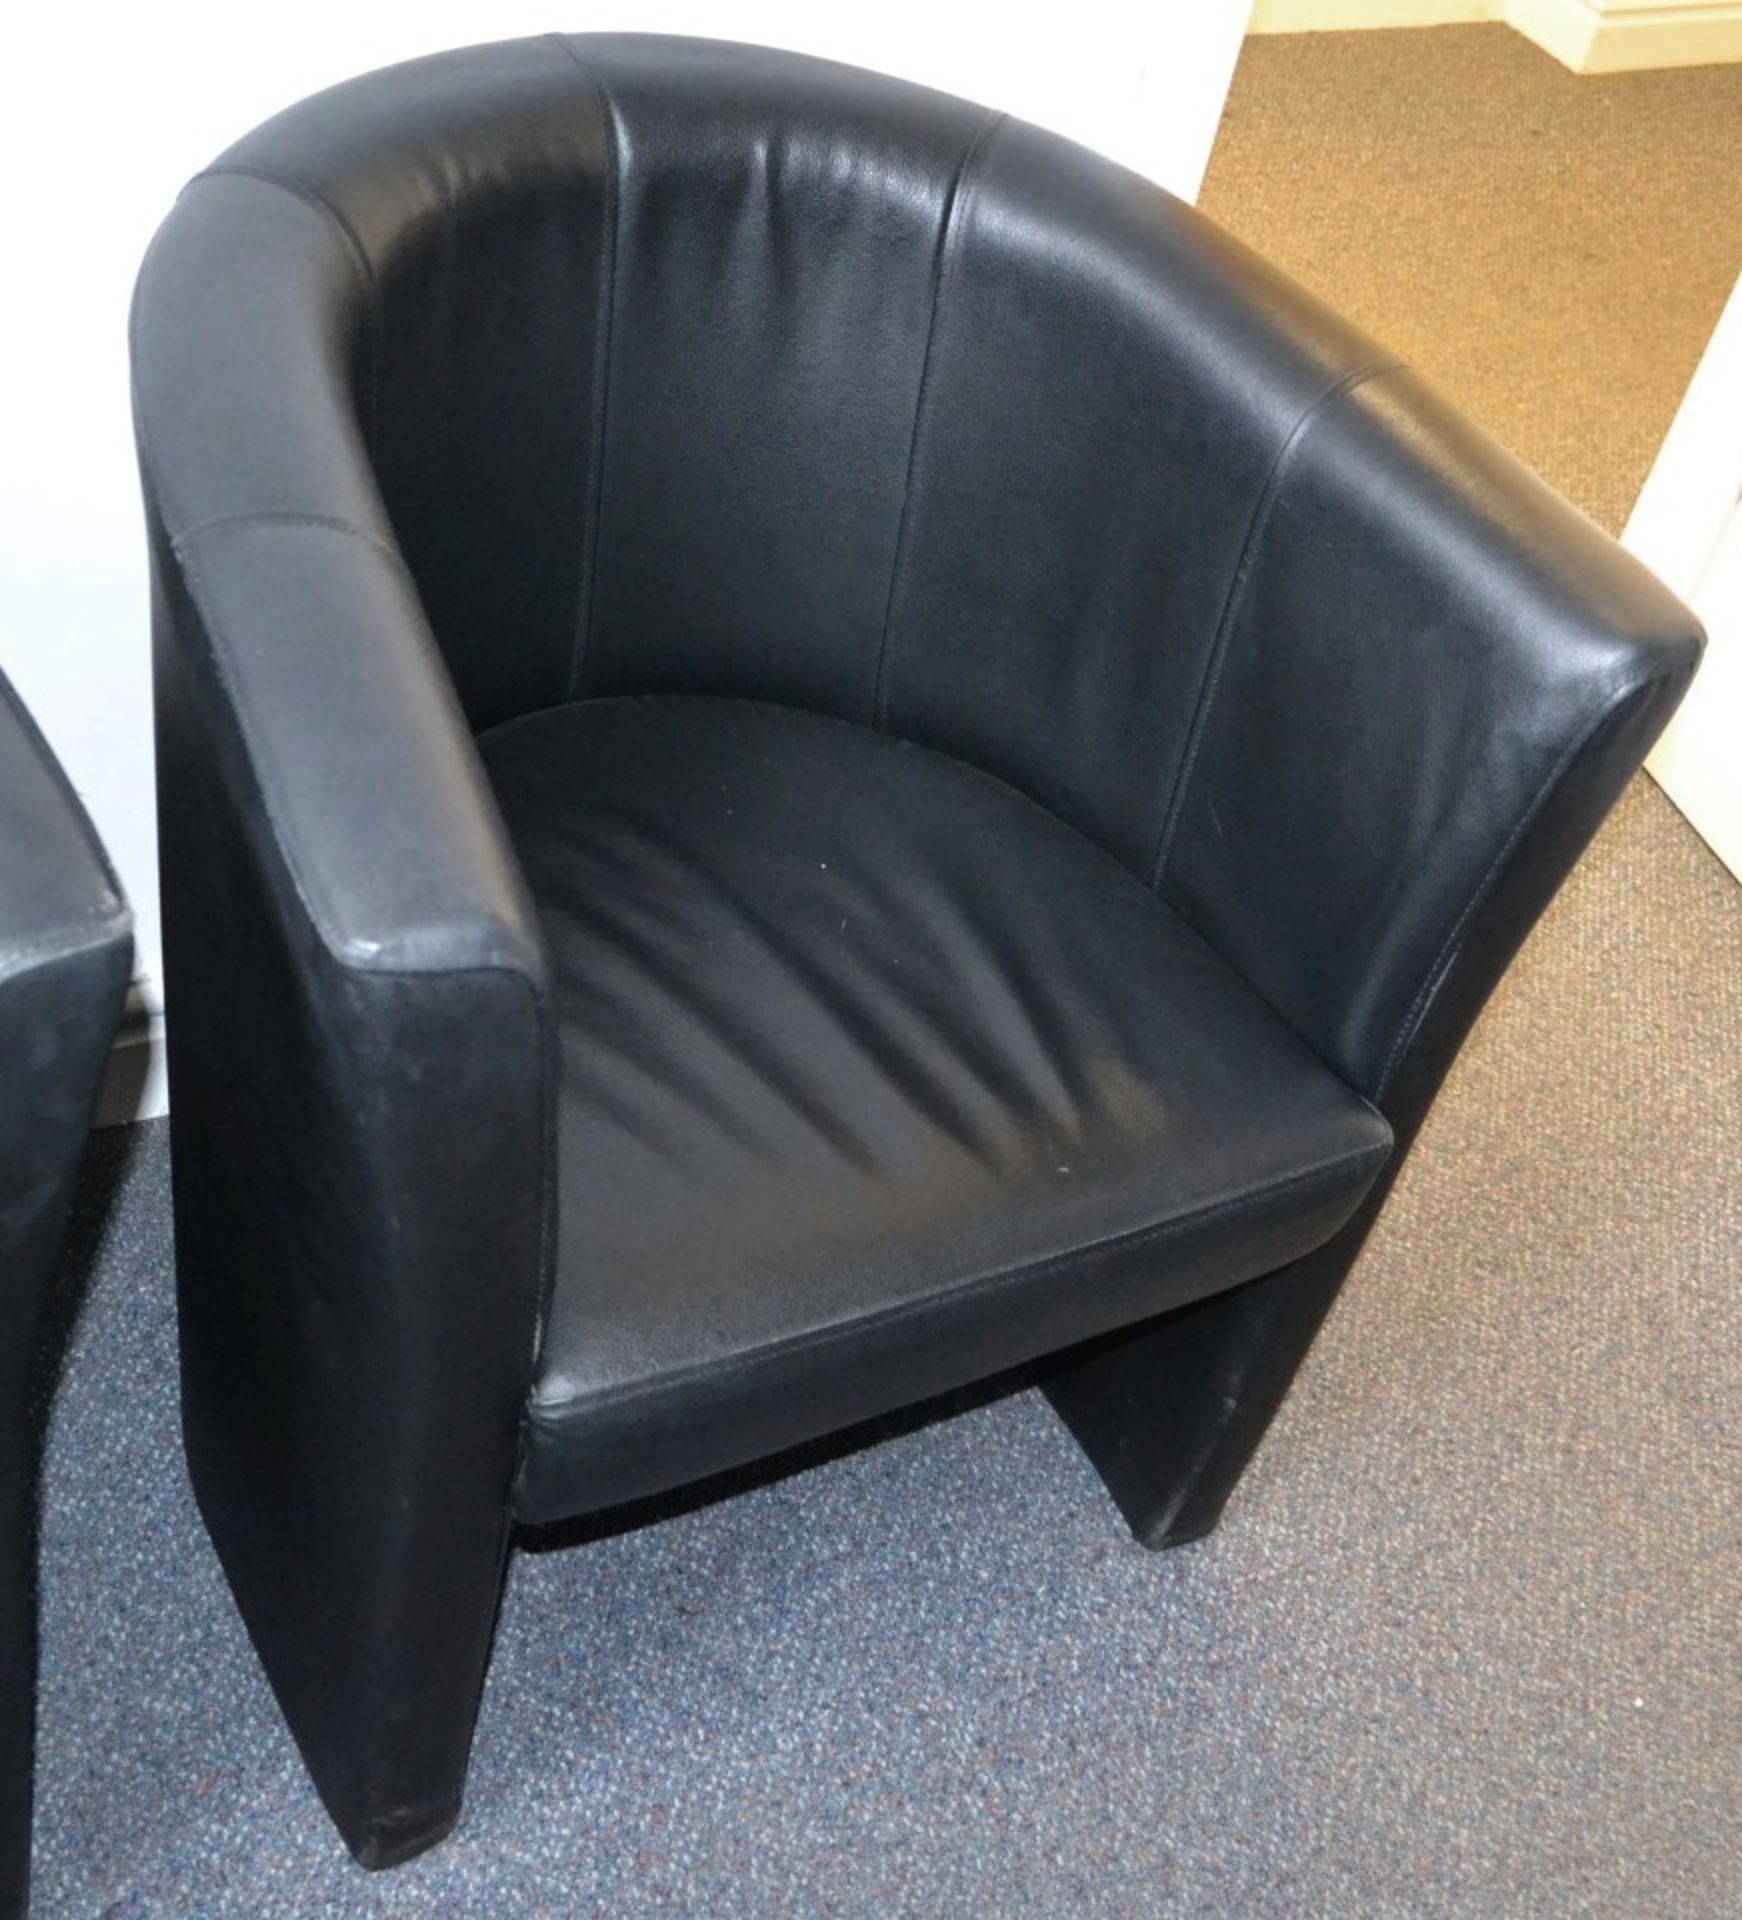 3 x Faux Leather Tub Chairs In Black - In Good Overall Condition - Ref BB1184 KS - Image 3 of 3